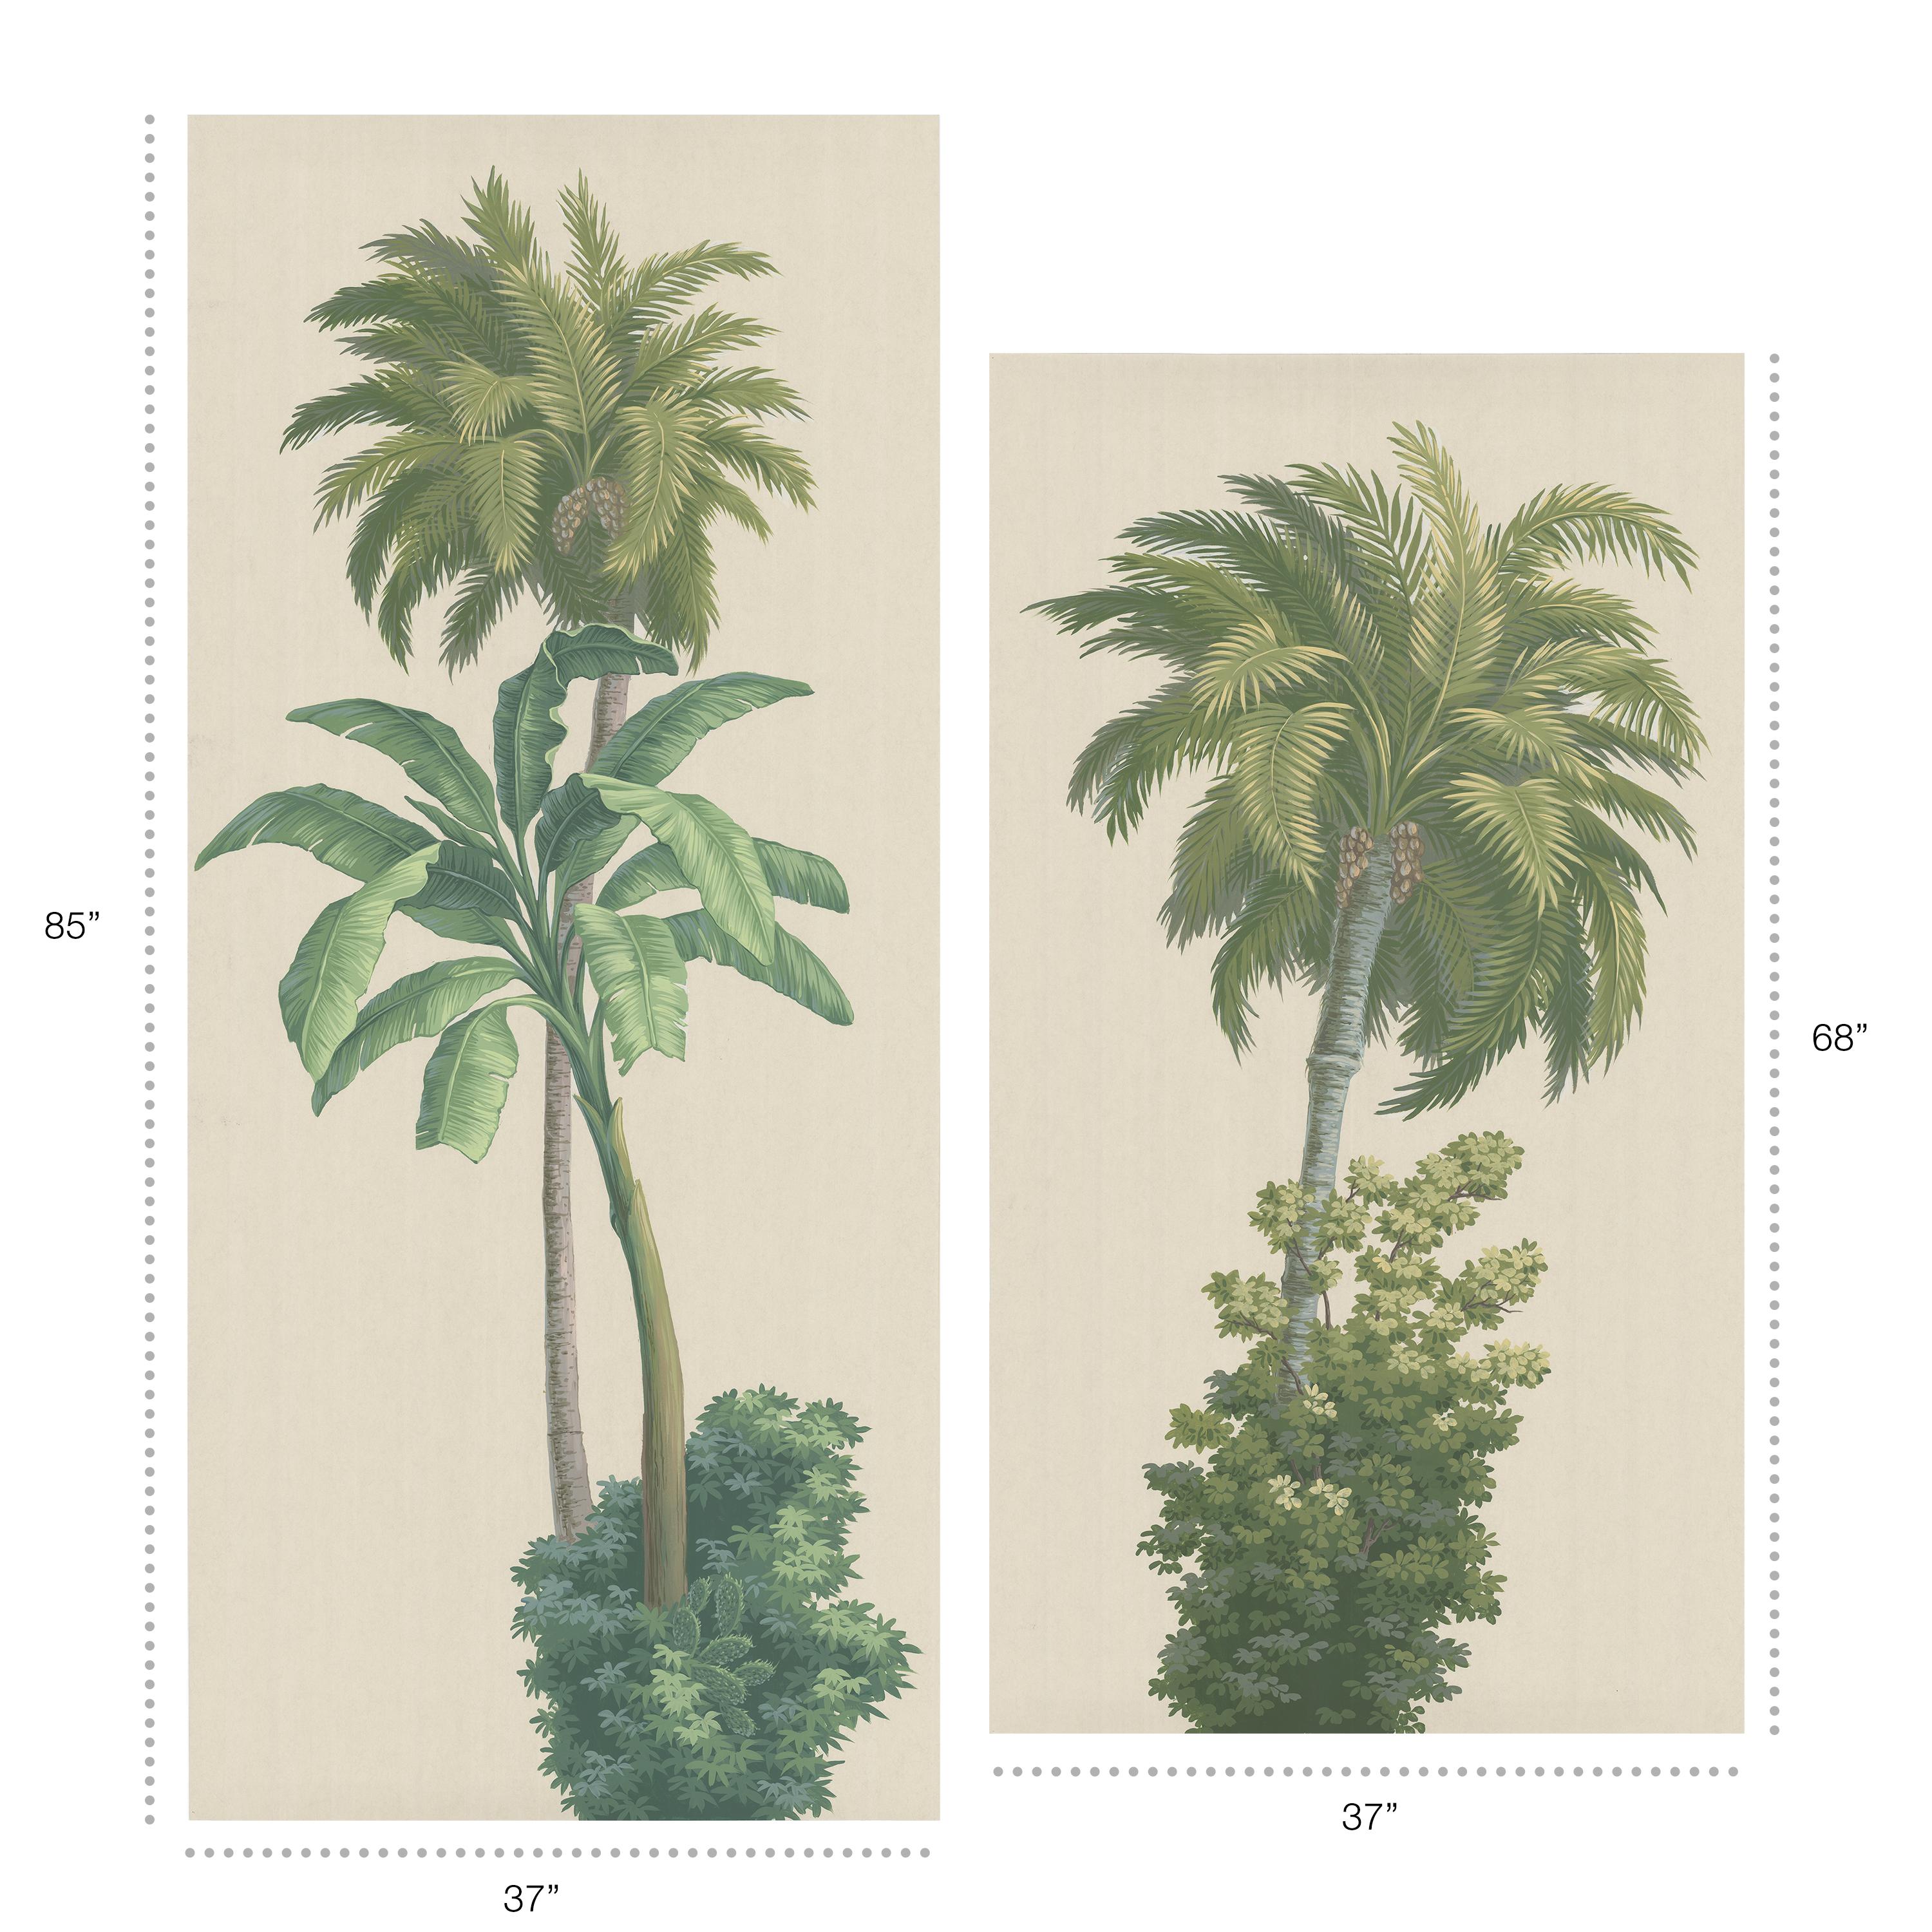 This pair of art pieces depict palm trees on a solid sandy cream colored background.  Each panel is hand painted in the European wood block style on a non-woven paper ground.  The panels are of different heights based on the trees depicted.  These